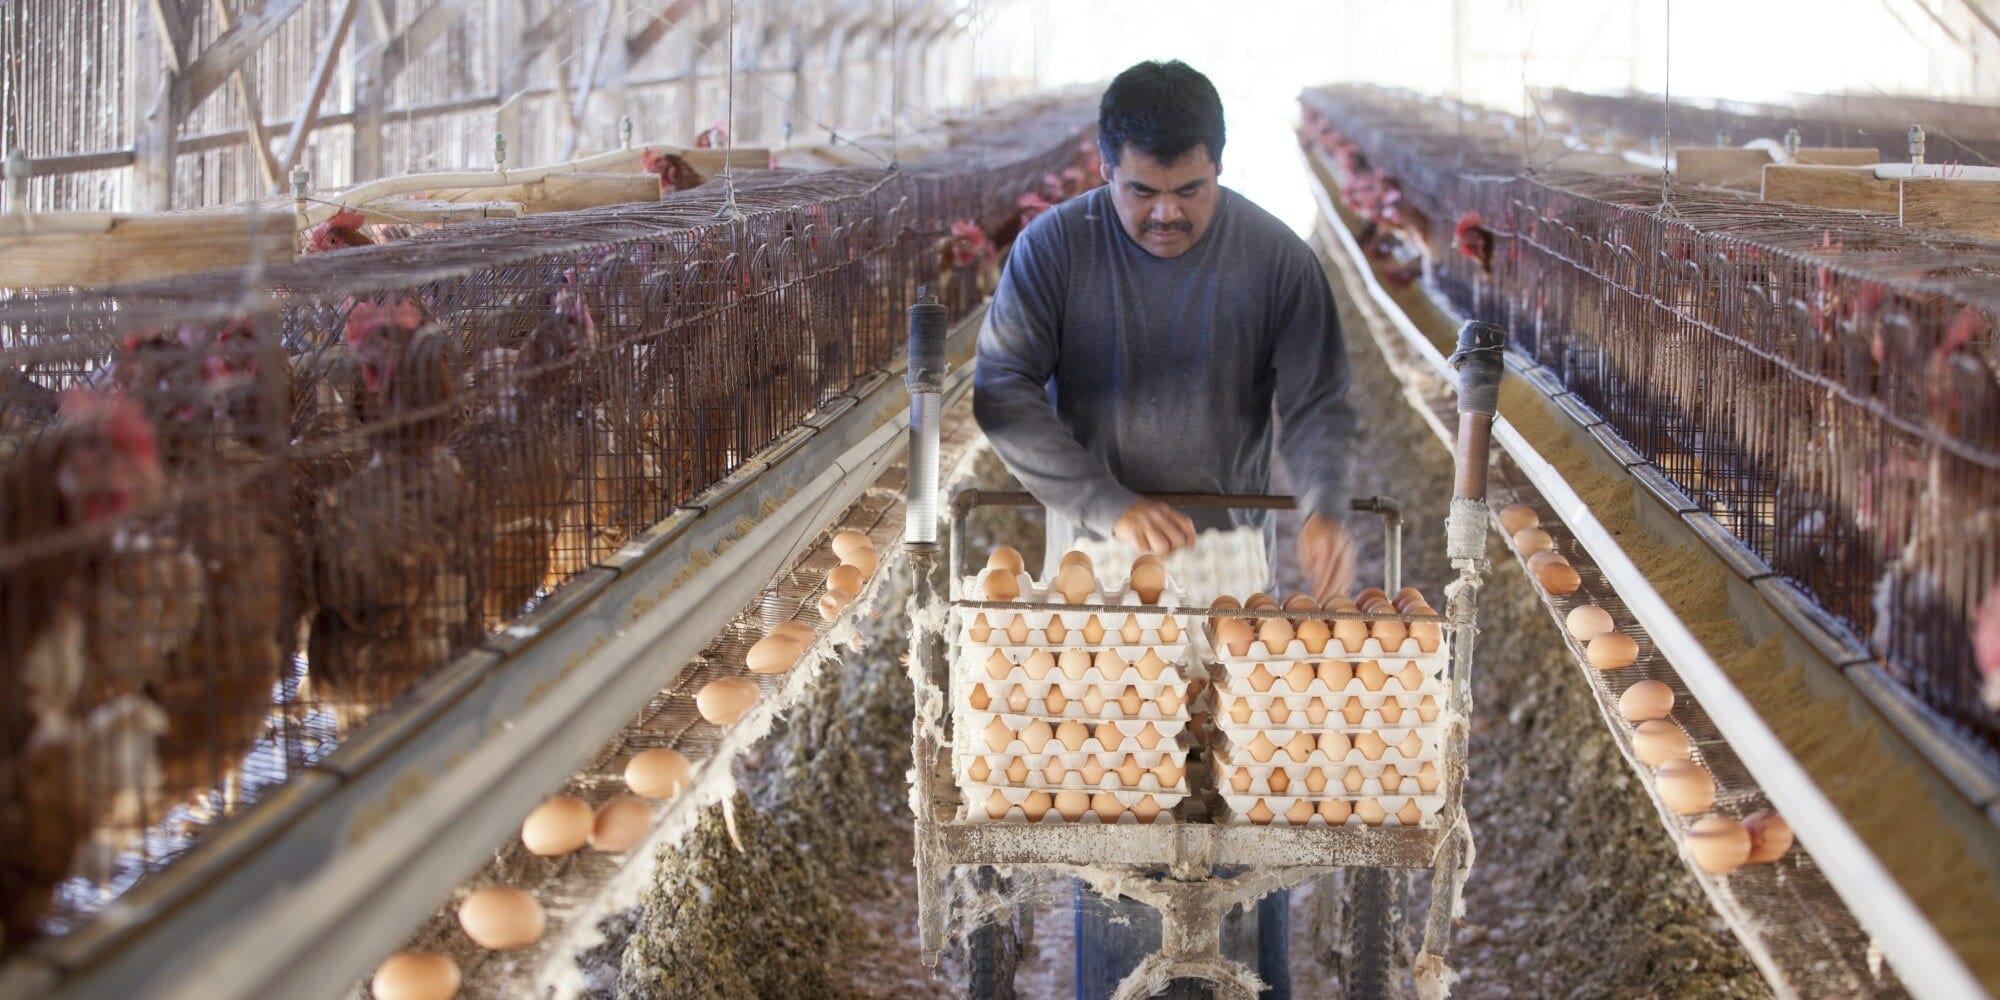 Conventional egg production